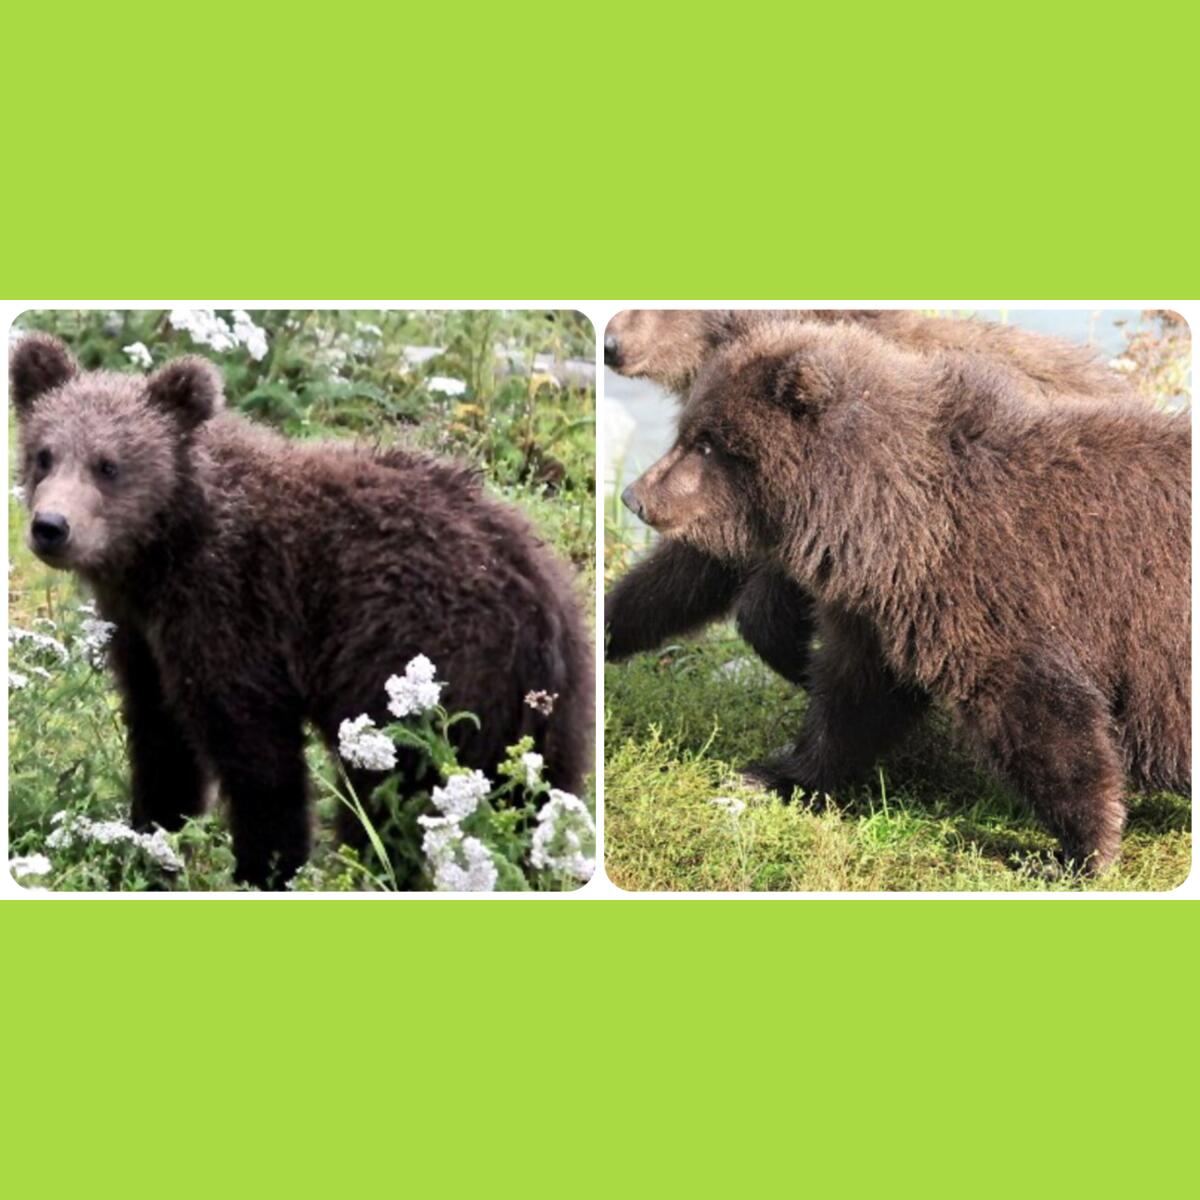 Two photos of a bear cub, before and after bulking up.